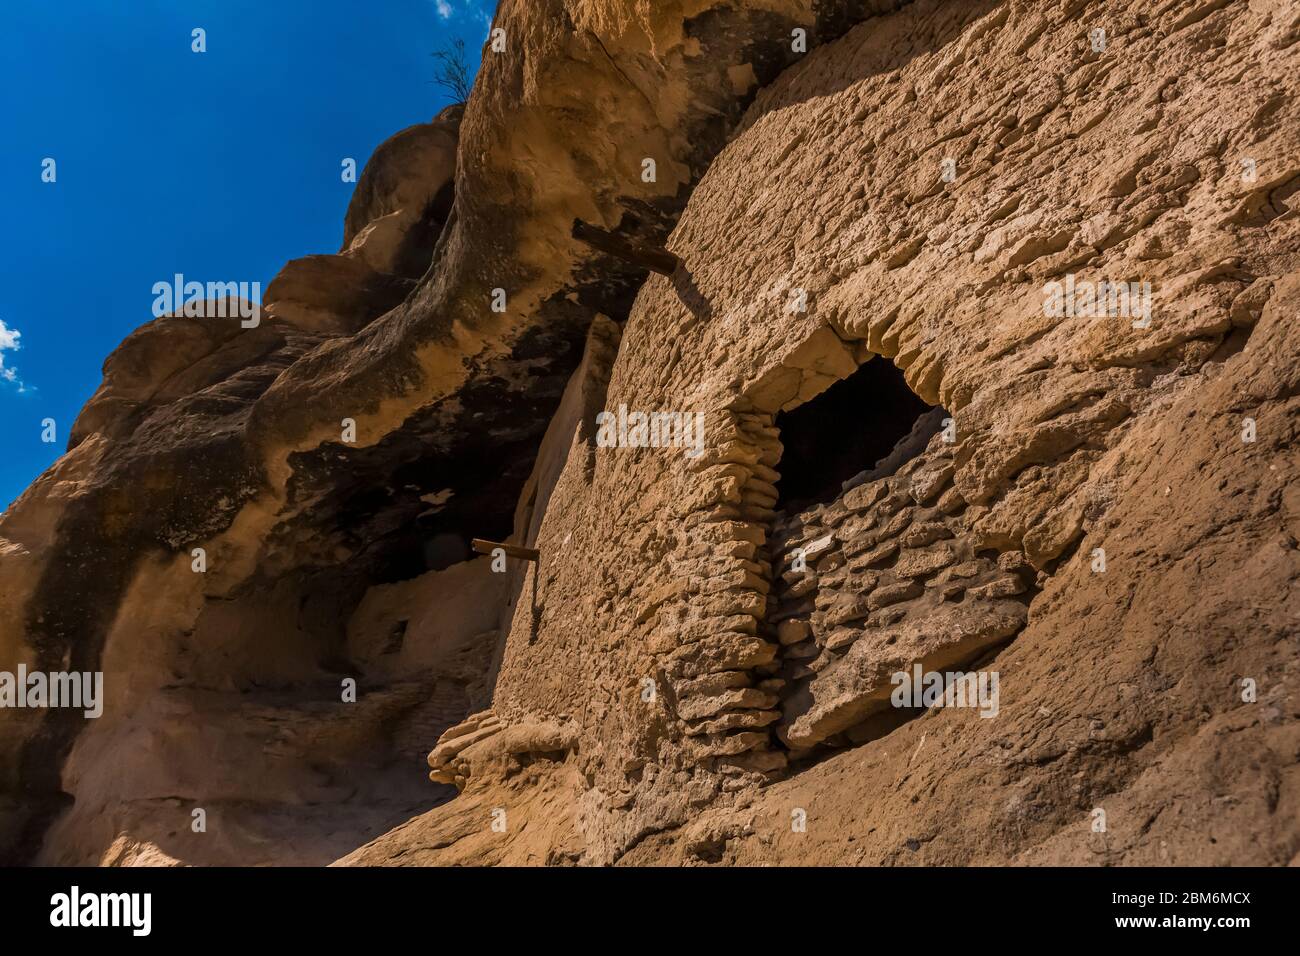 Cave cliff dwellings of ancient Mogollon Culture in Gila Cliff Dwellings National Monument, New Mexico, USA Stock Photo